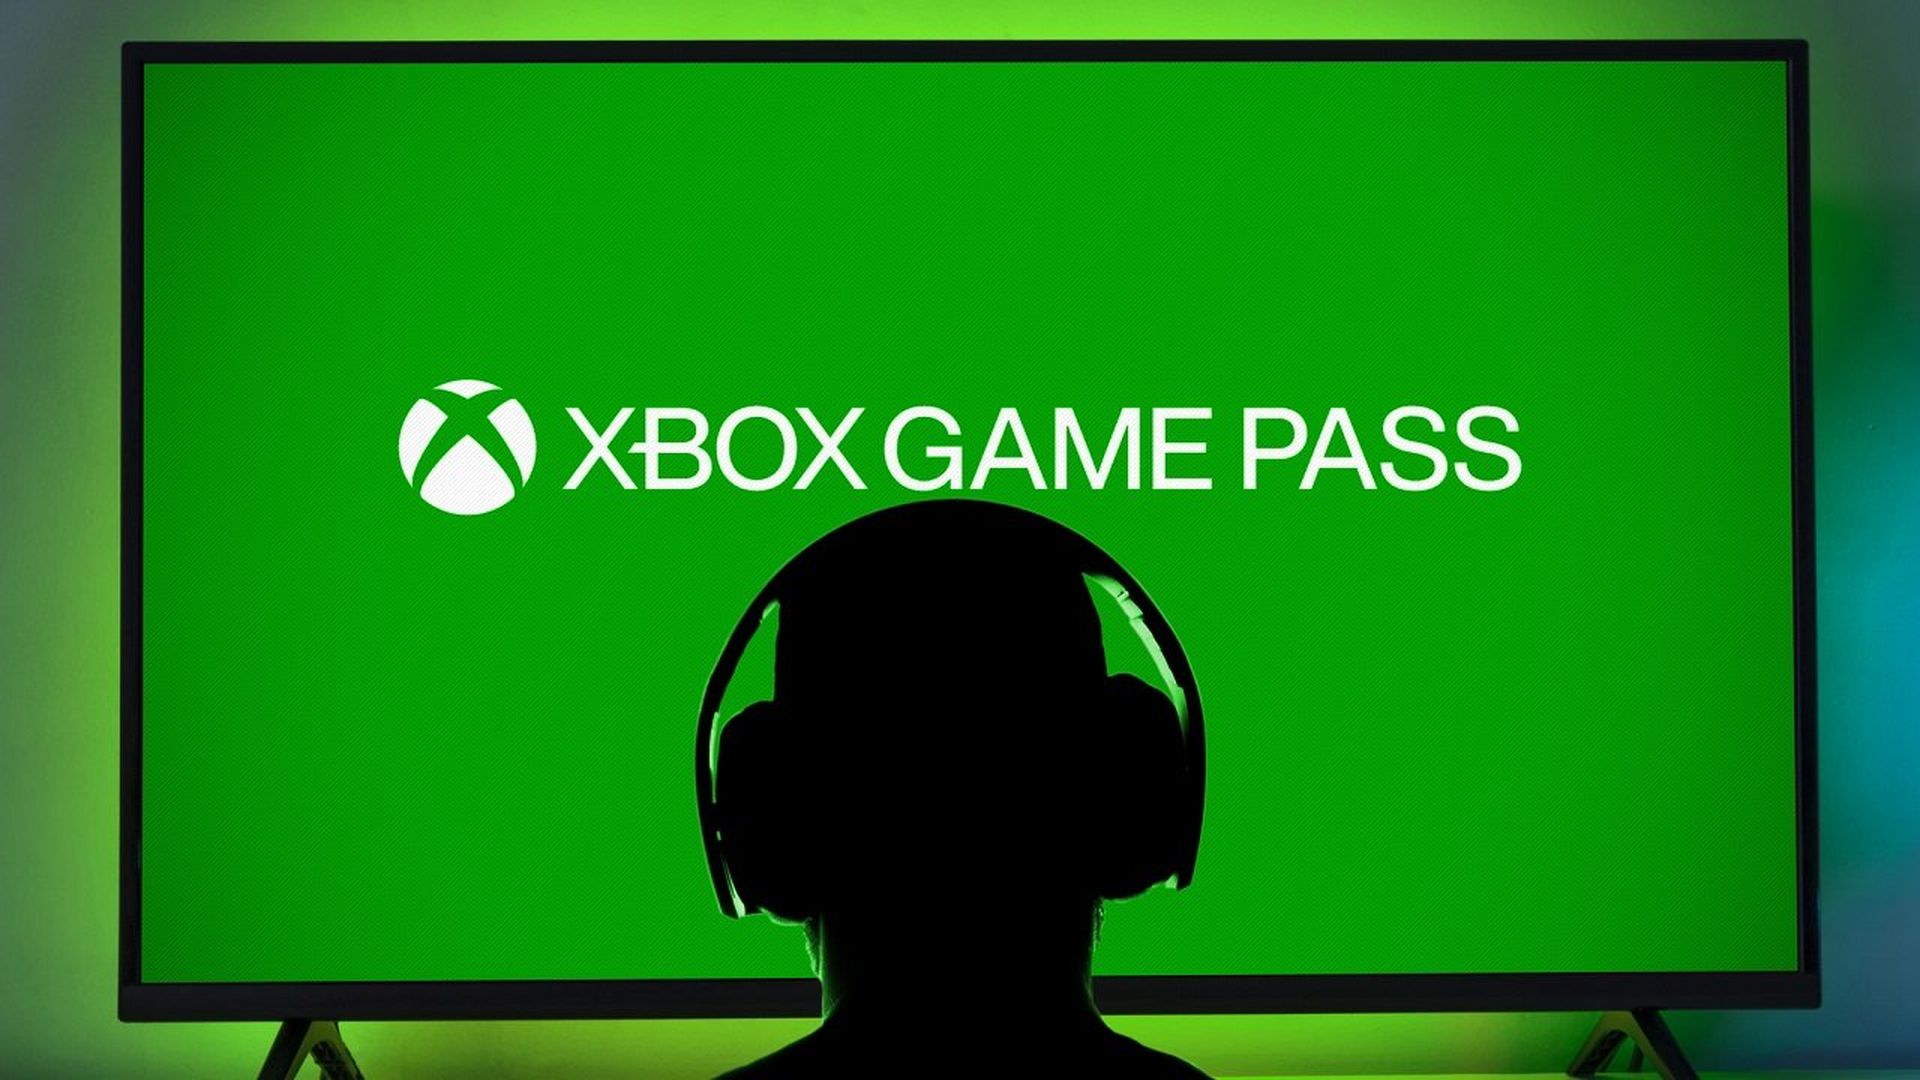 If you are wondering how much the new plan will cost, we've got you covered as the Xbox Game Pass family plan price was revealed by Microsoft.